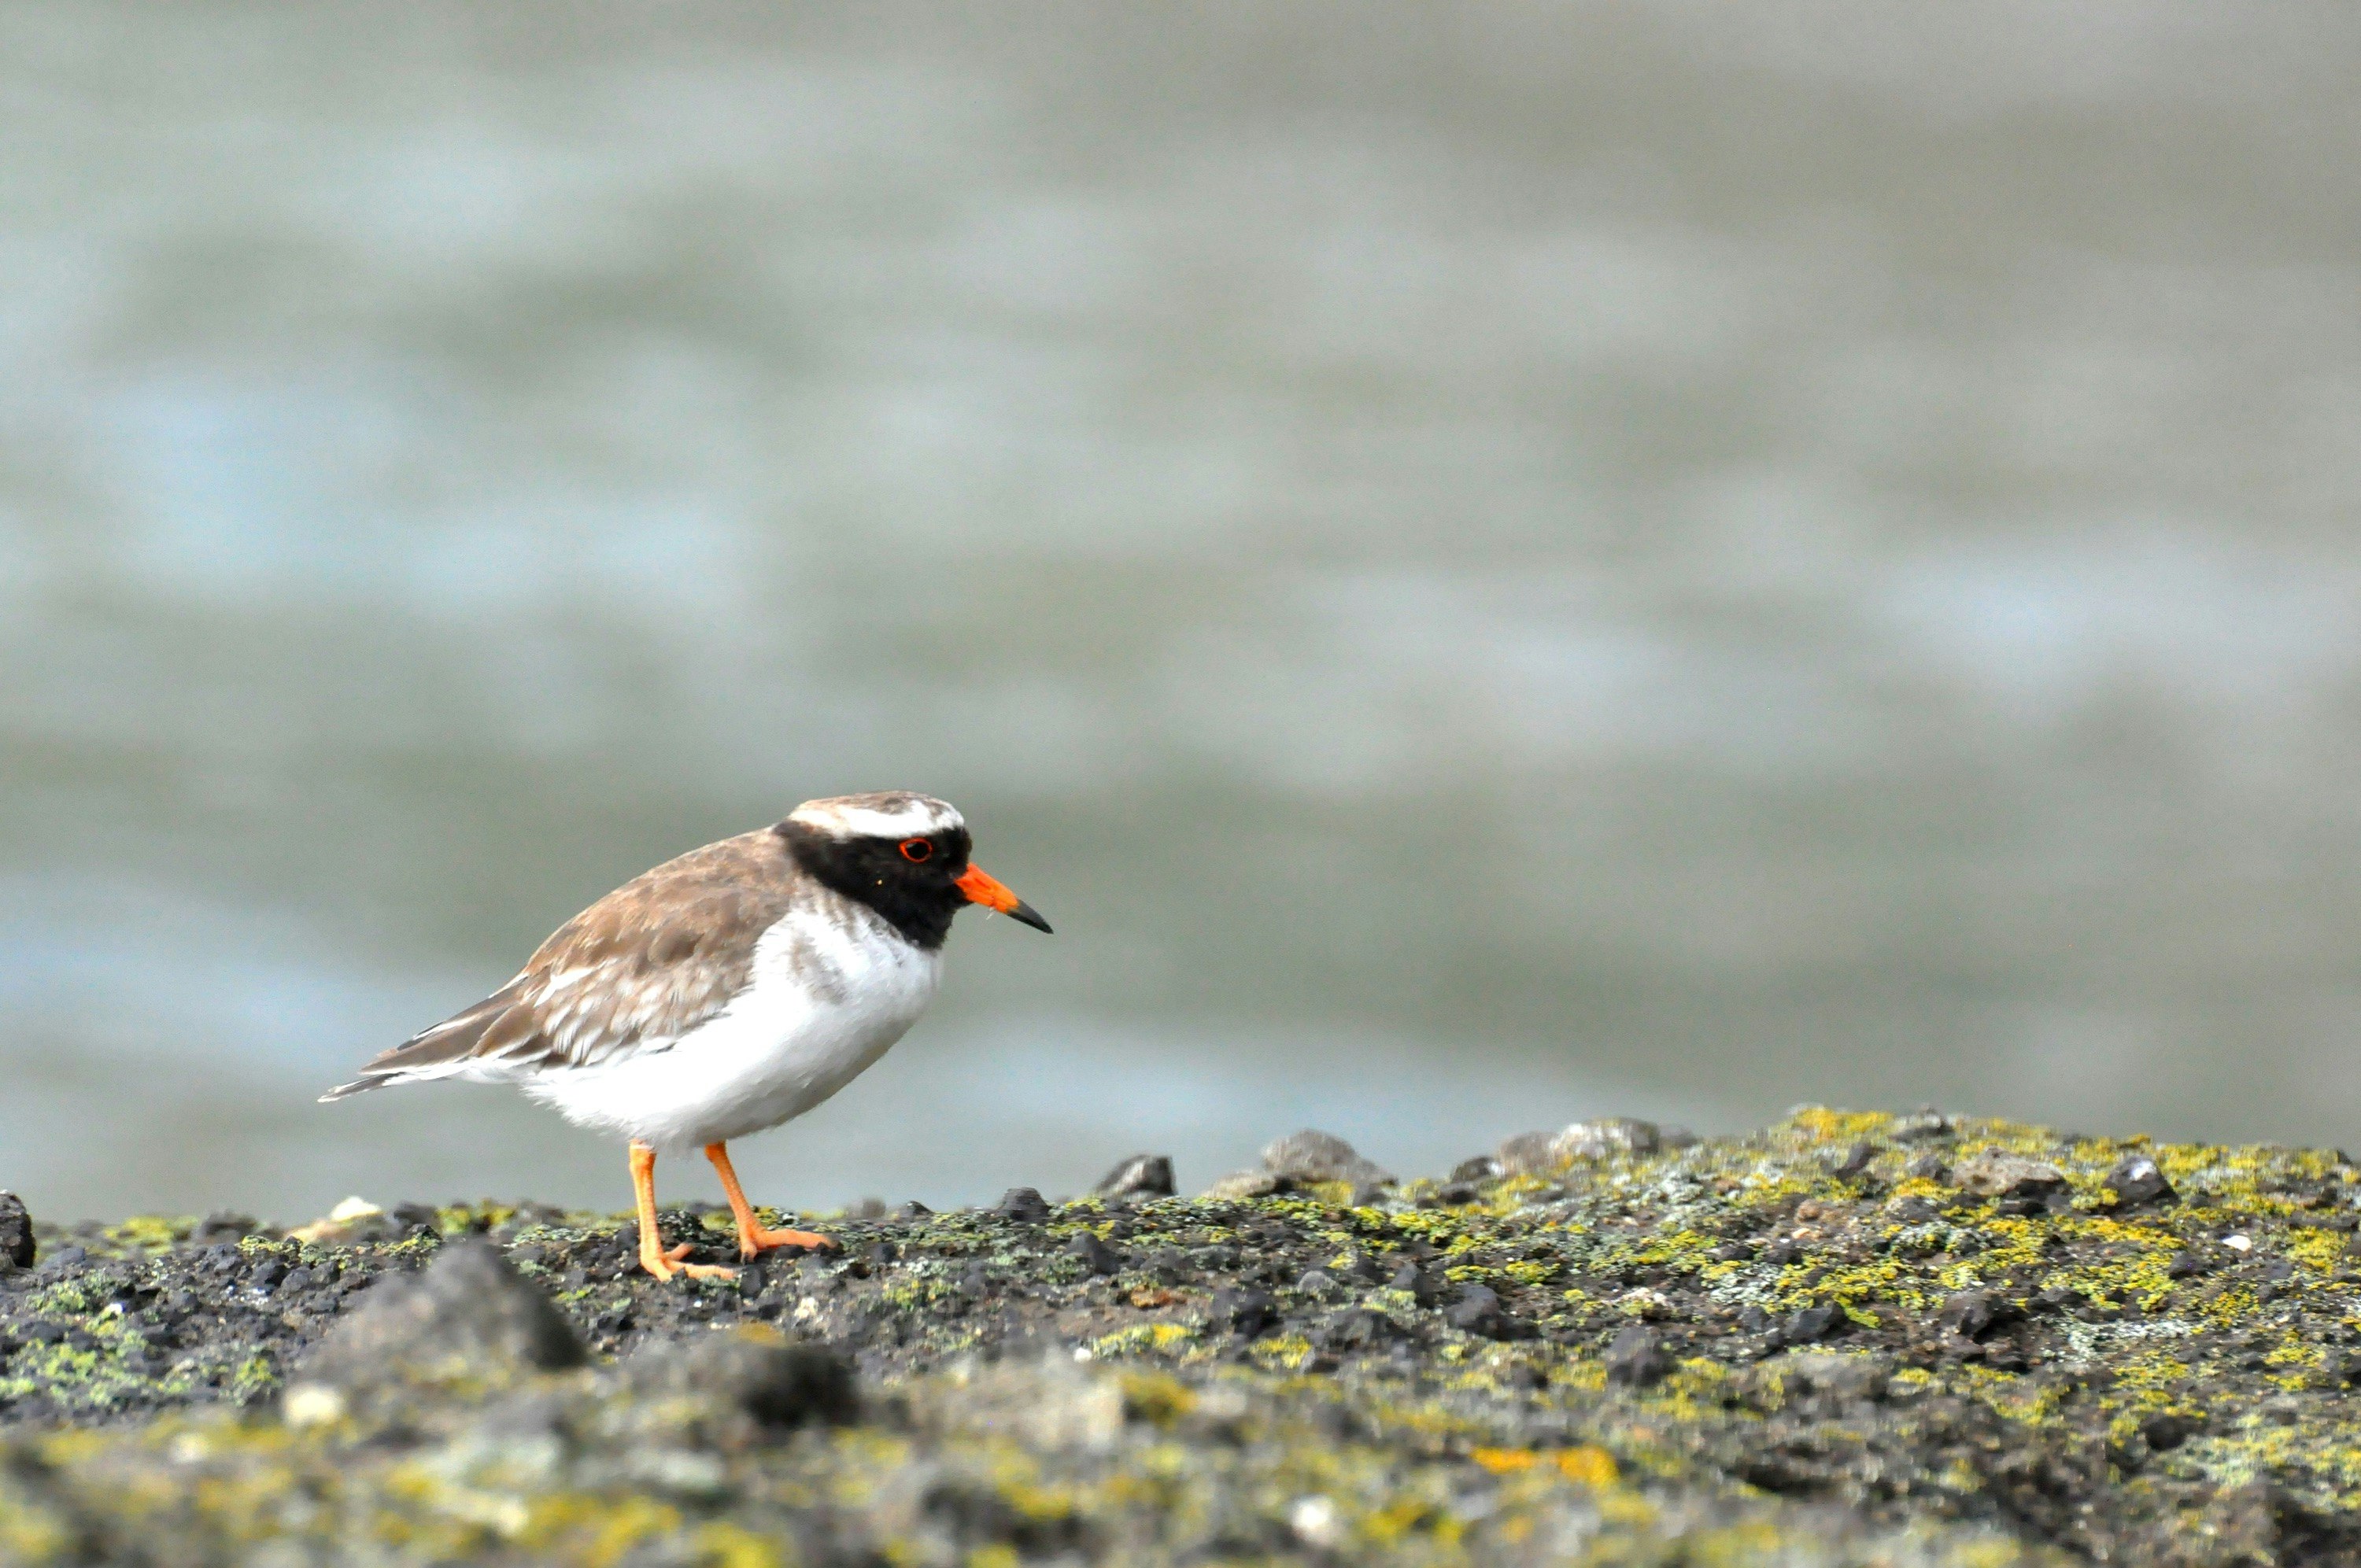 a small white and brown bird with a black head and orange beak called a plover